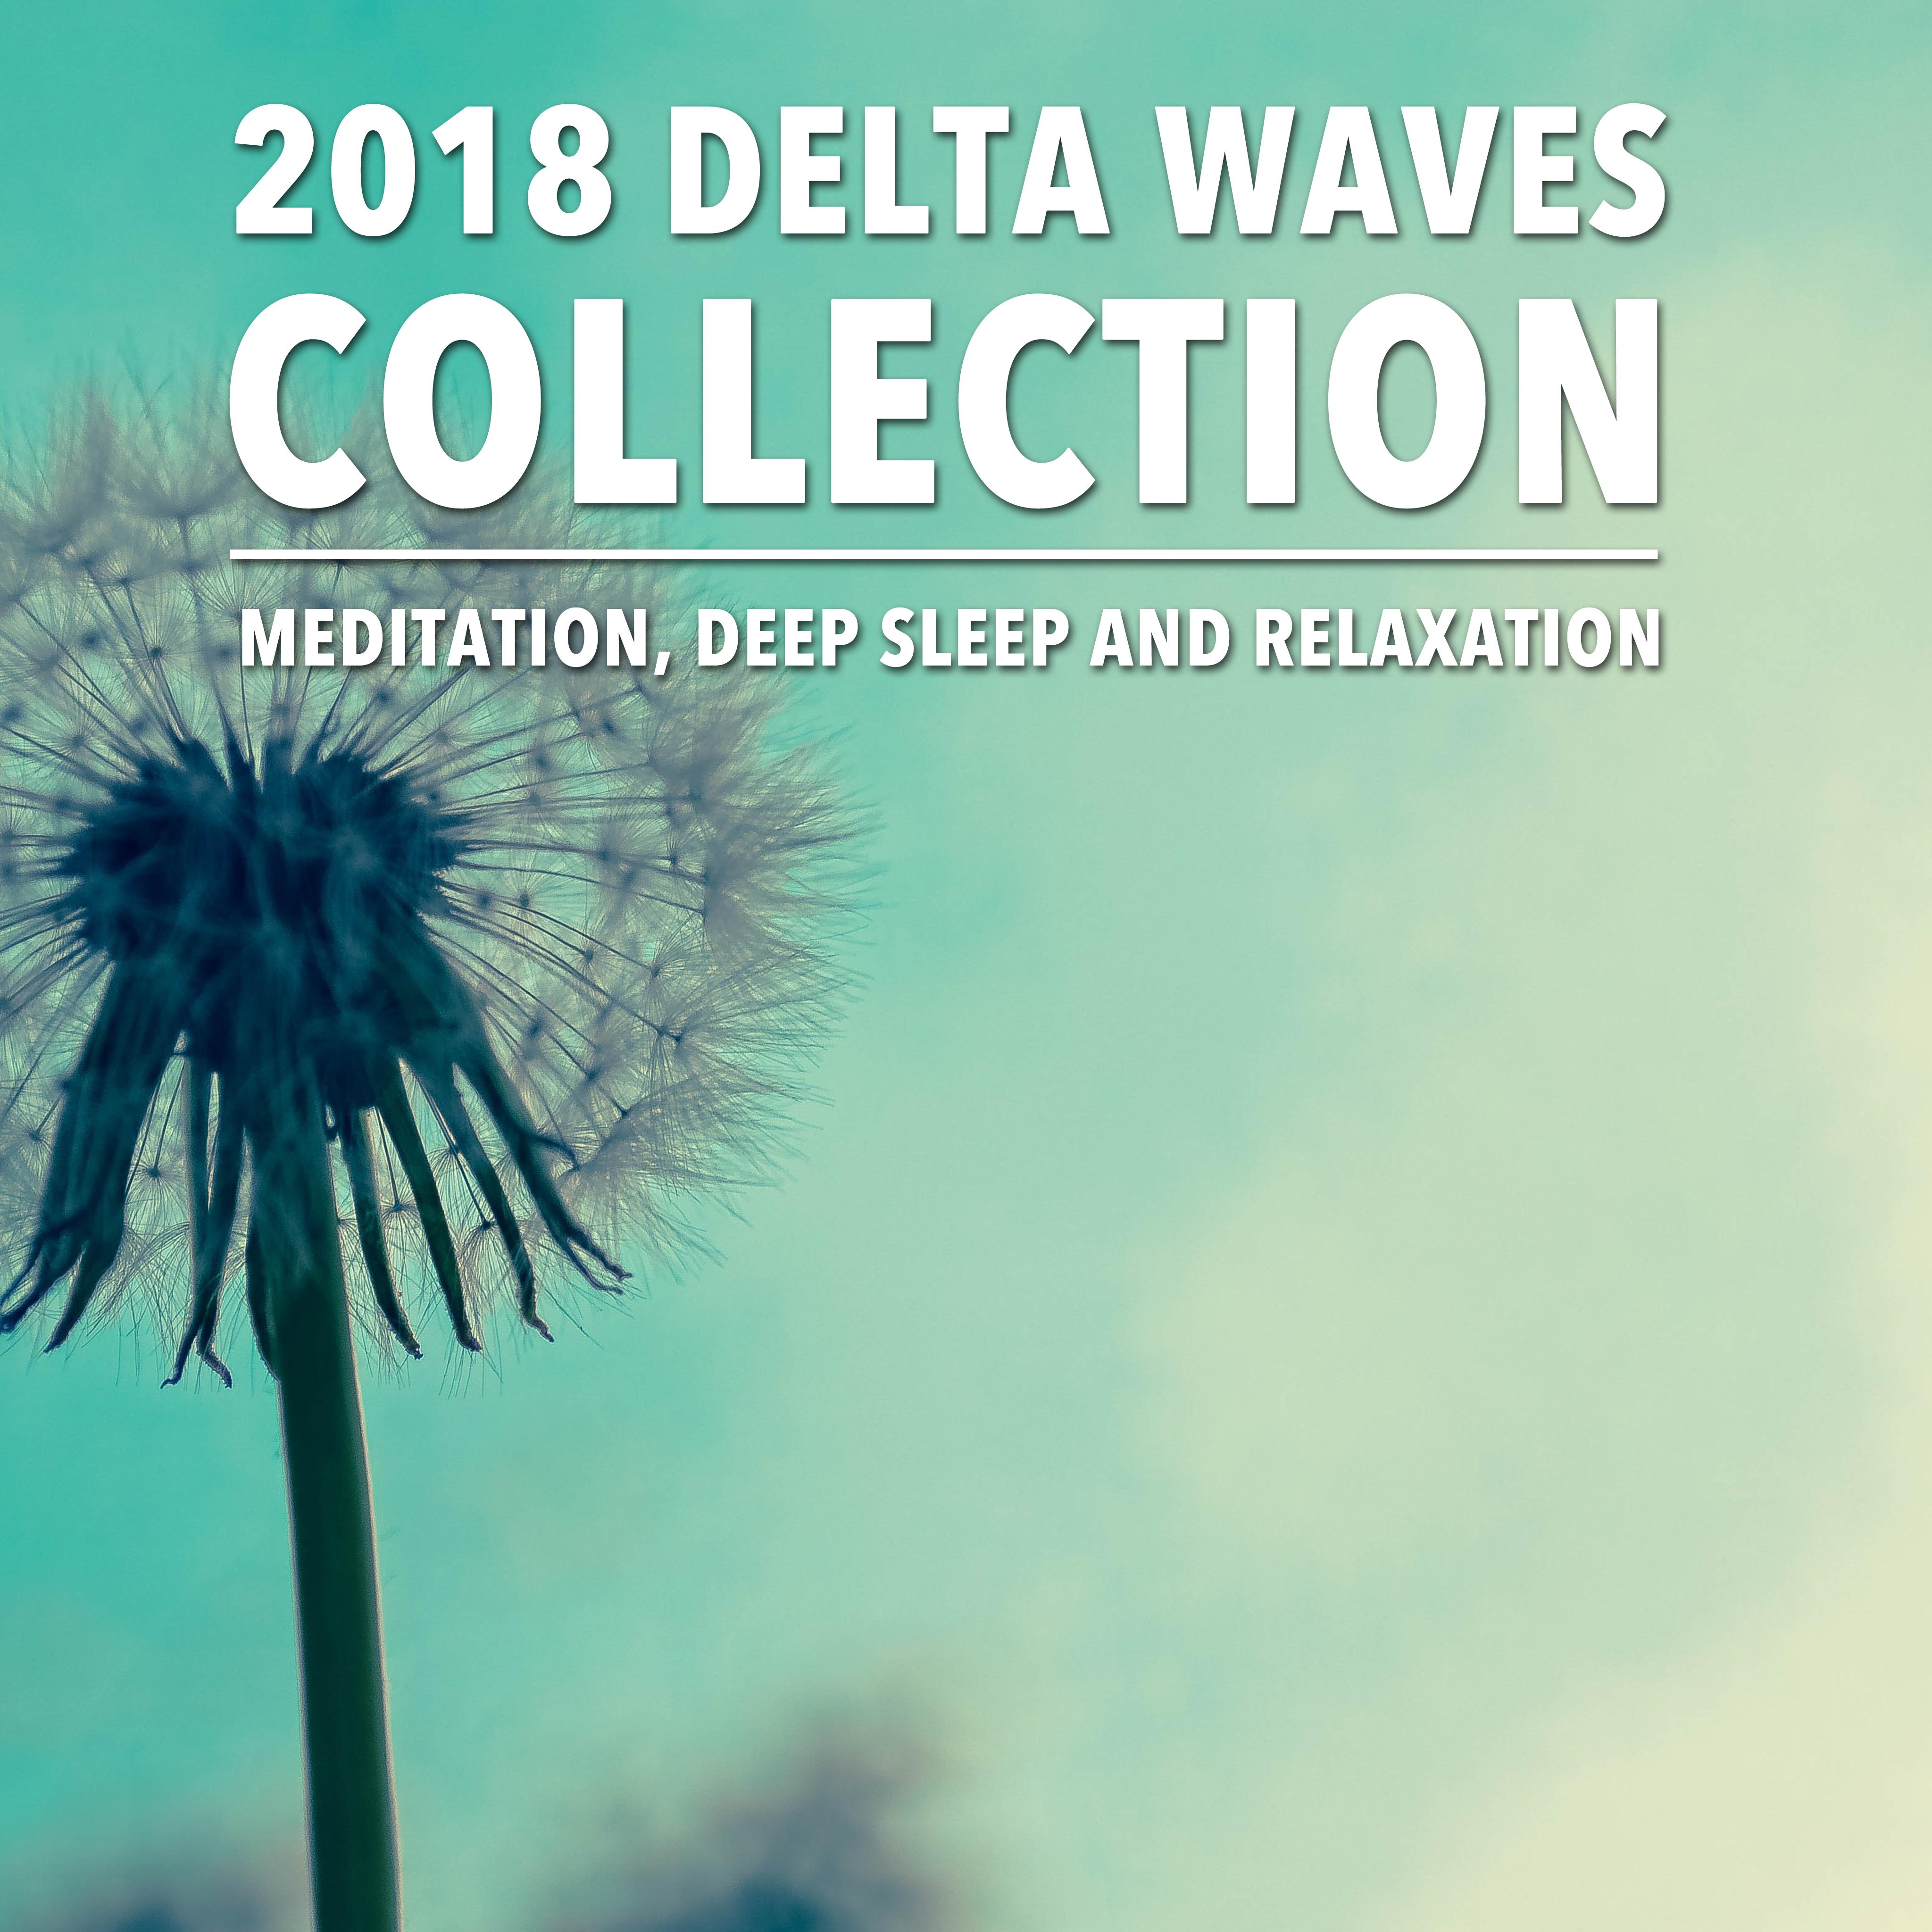 2018 Delta Waves Collection - Meditation Deep Sleep and Relaxation